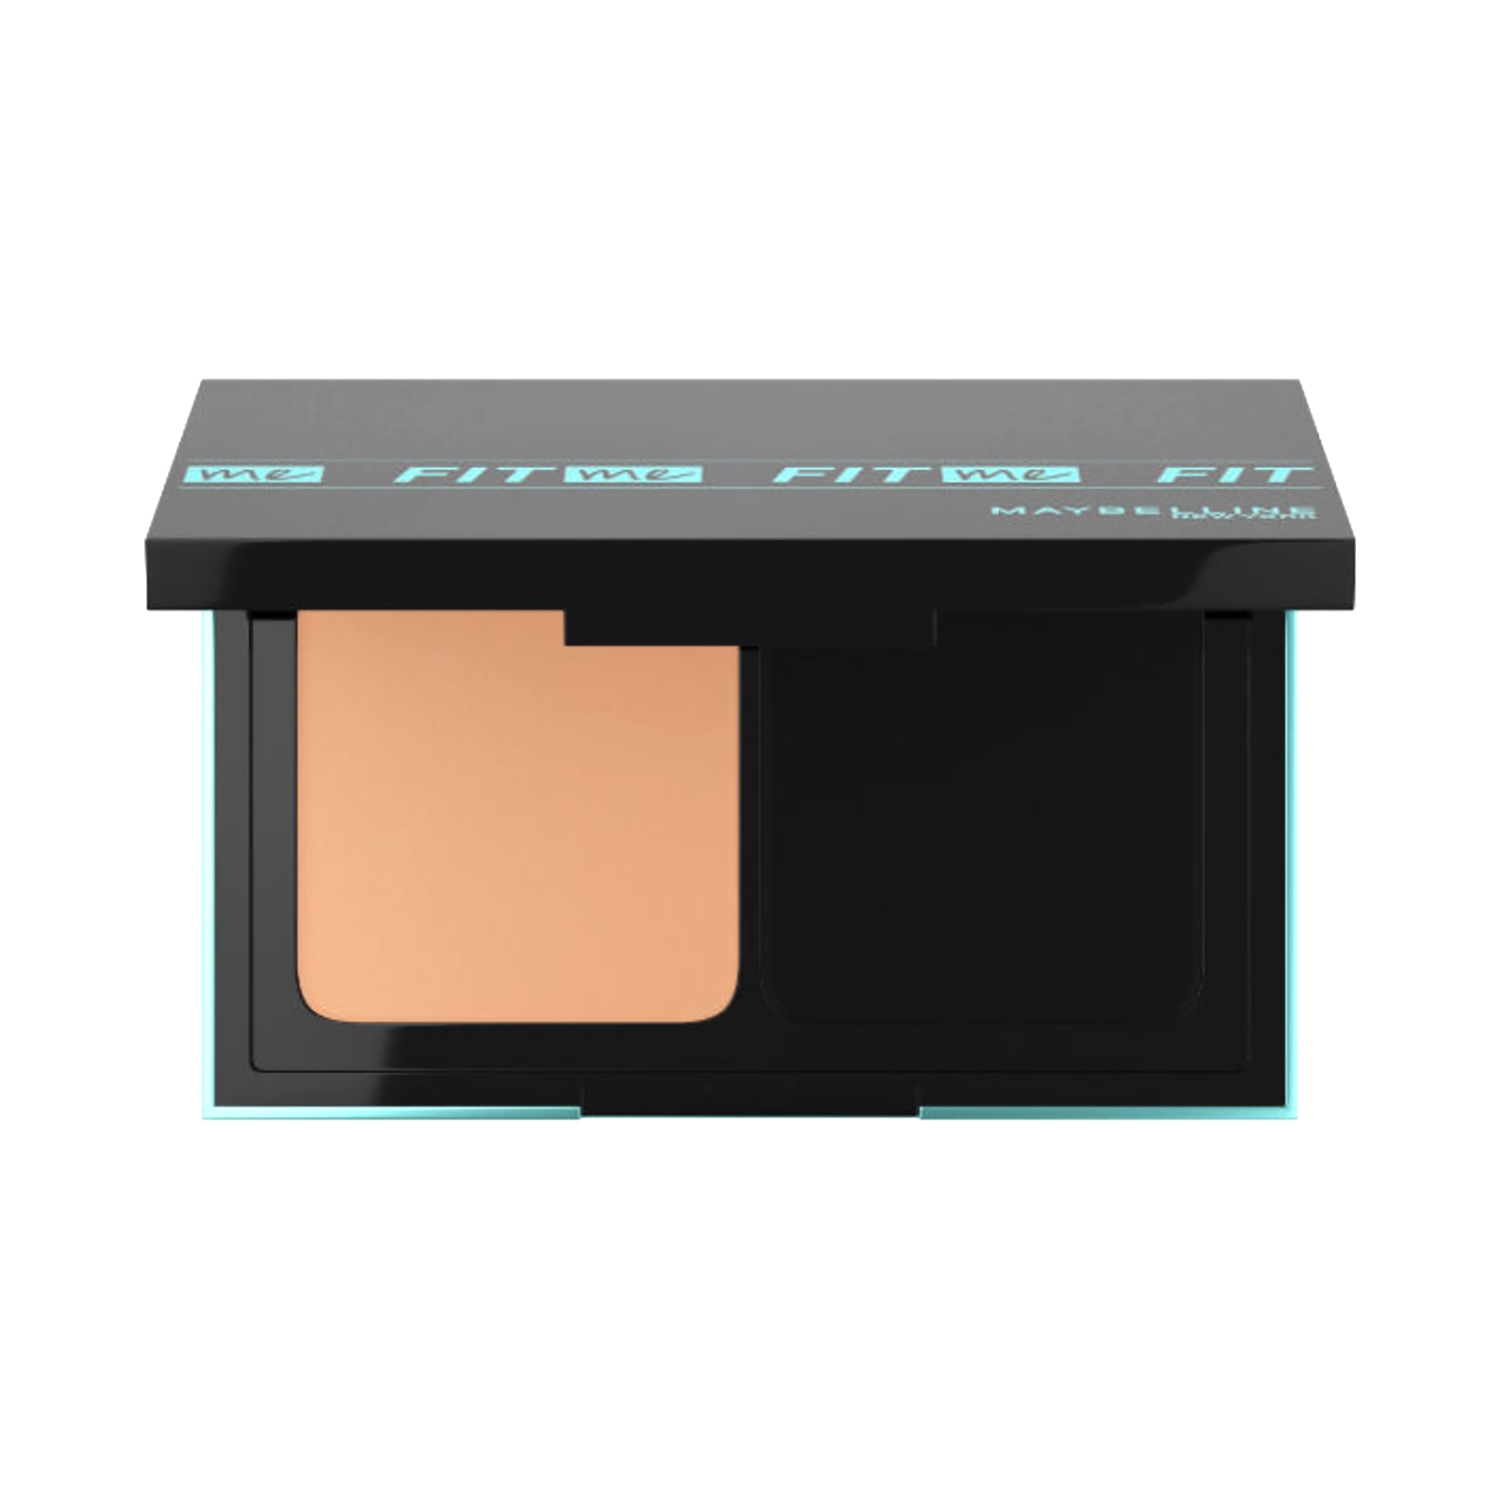 Maybelline New York | Maybelline New York Fit Me Ultimate Powder Foundation - Shade 230 (9g)